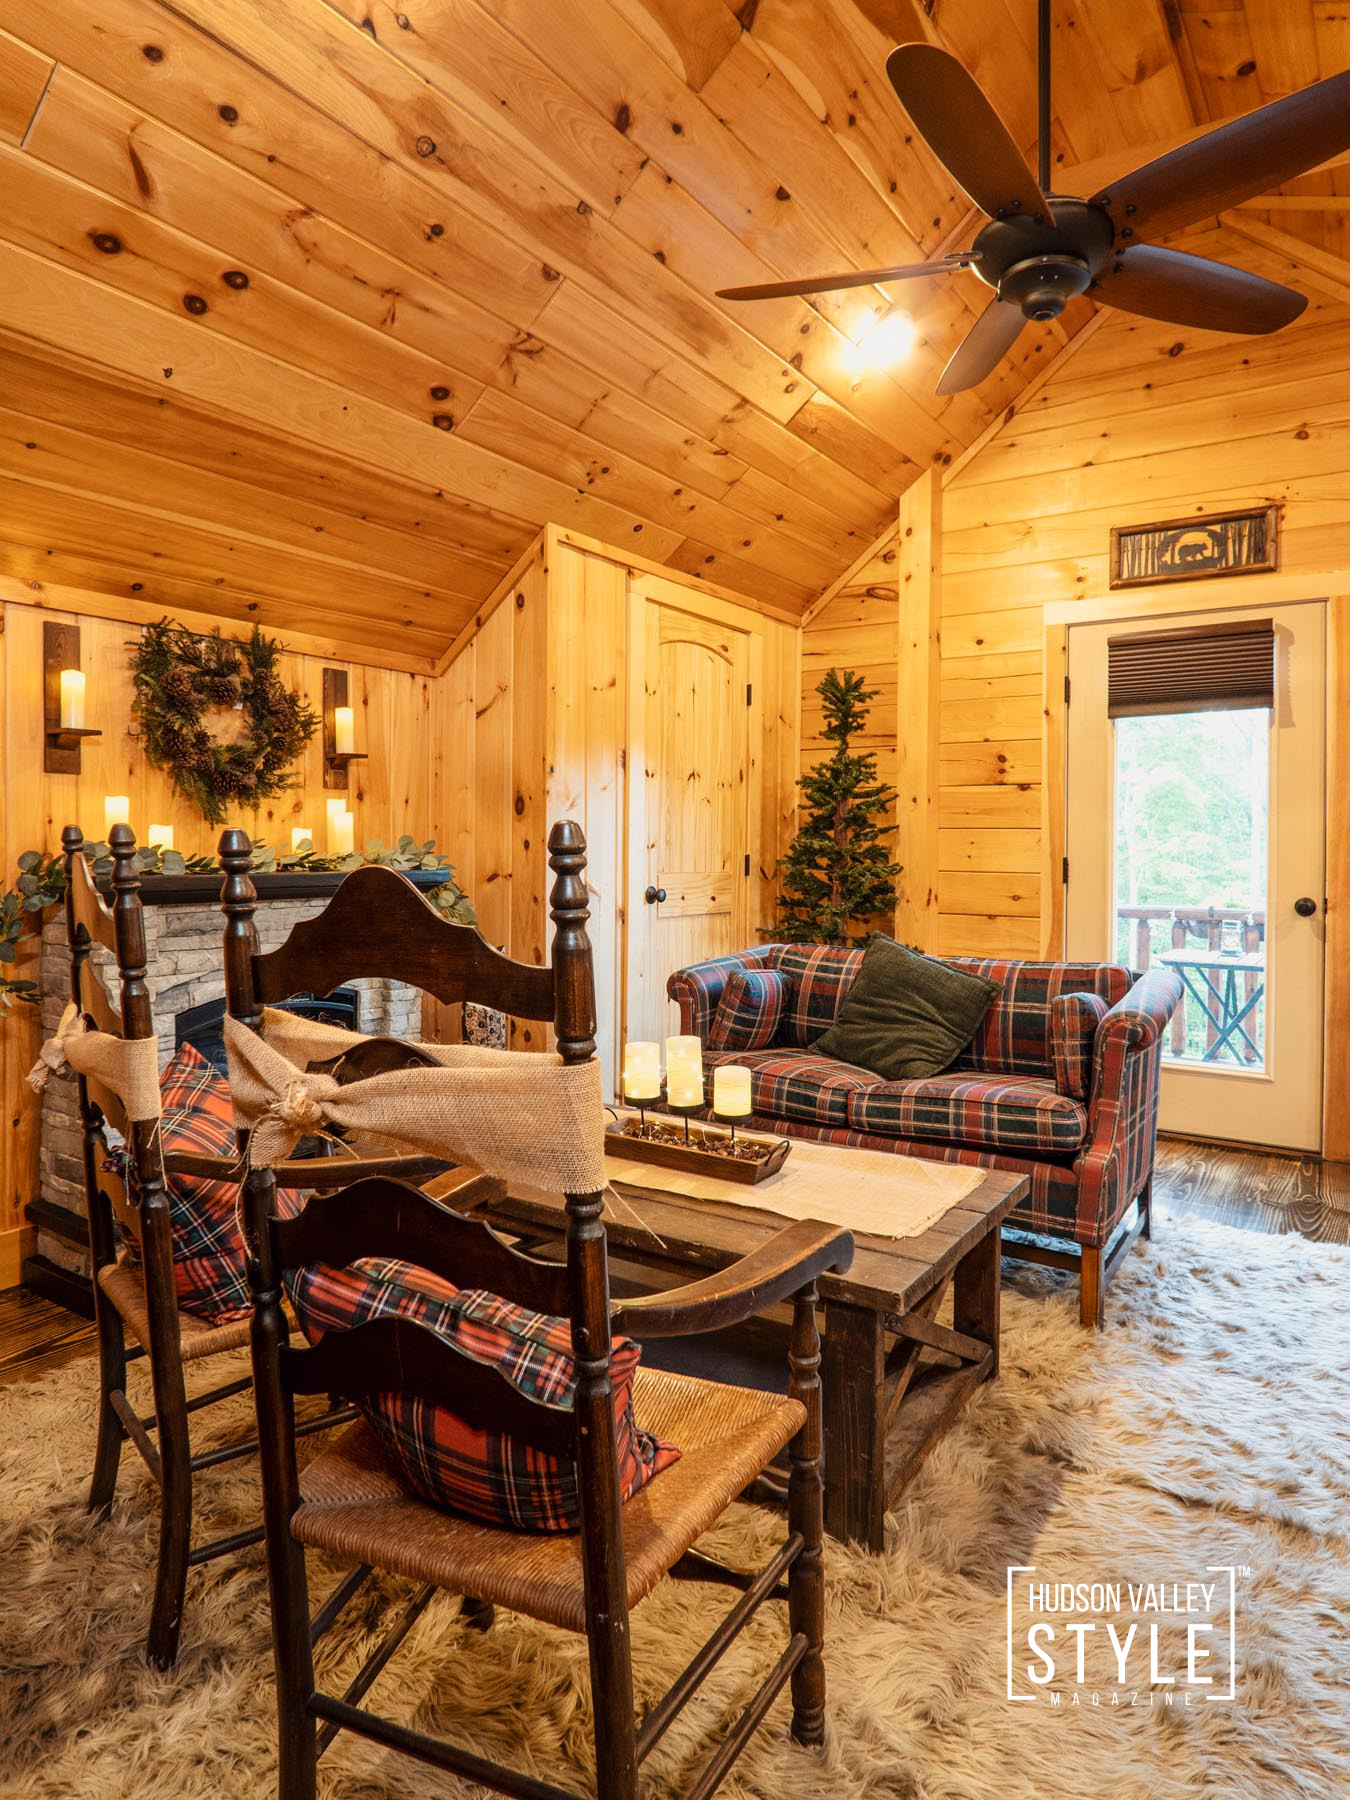 The Catskill Mountains Cabin – Airbnb Photography in the Hudson Valley and Catskills: Meet Alluvion Media – The best Airbnb Photographer in Upstate, NY